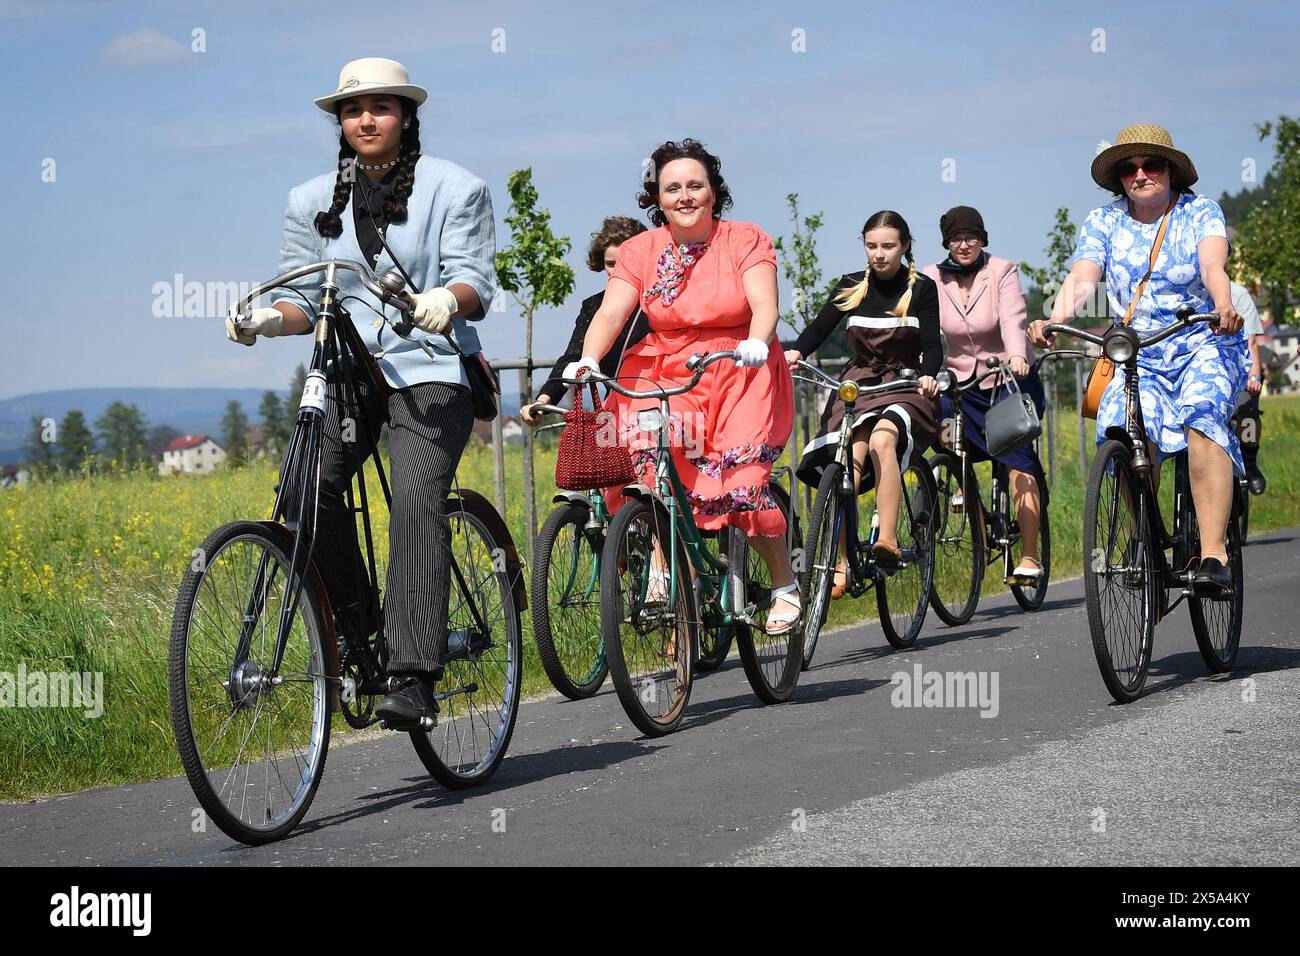 May 8, 2024, Vsen, Czech Republic: Historic High Wheel Penny-farthing bicycle ride in Vsen in the Bohemian Paradise region of the Czech Republic. Vintage with a bright twist, hoping to win the best dressed bike competition in the annual Historic High Wheel Penny-farthing bicycles ride. The penny-farthing, also known as a high wheel and ordinary, is a type of bicycle with a large front wheel and a much smaller rear wheel. It was popular after the boneshaker until the development of the safety bicycle in the 1880s. It was the first machine to be called a ''bicycle' (Credit Image: © Slavek Ruta/Z Stock Photo